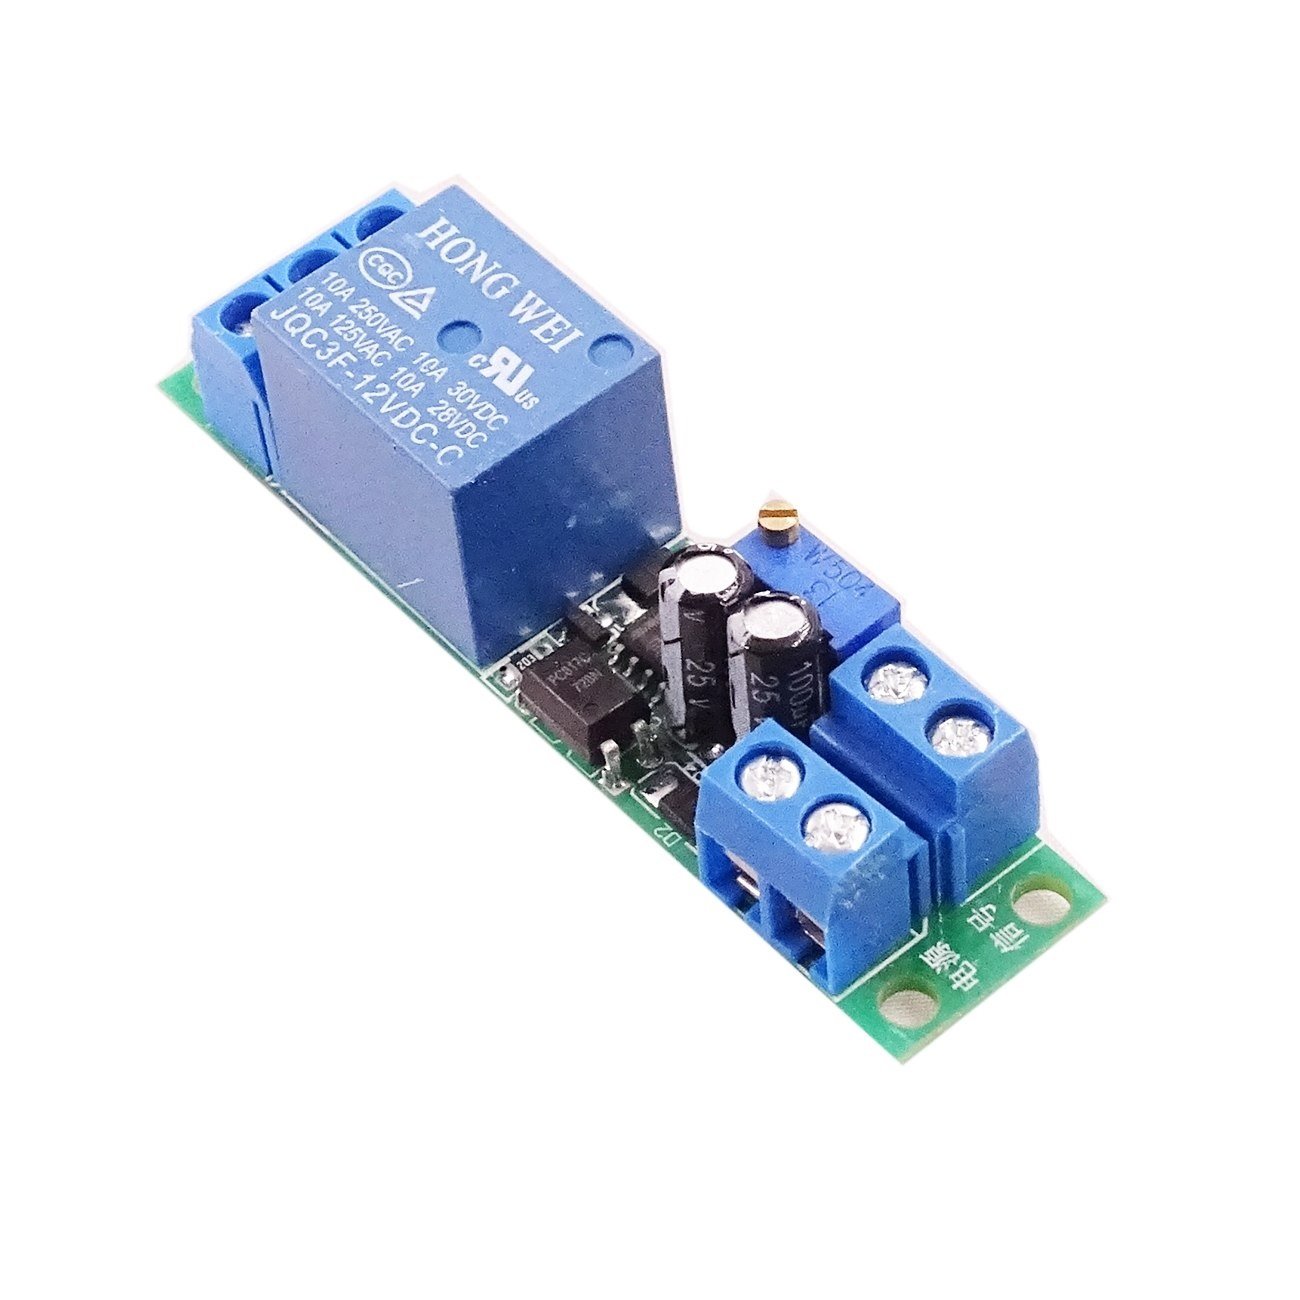 DC 4-Channel Multifunction Delay Time Timer Relay Switch Module Over Voltage Relay DC12V Relay Trigger Switch Relay 